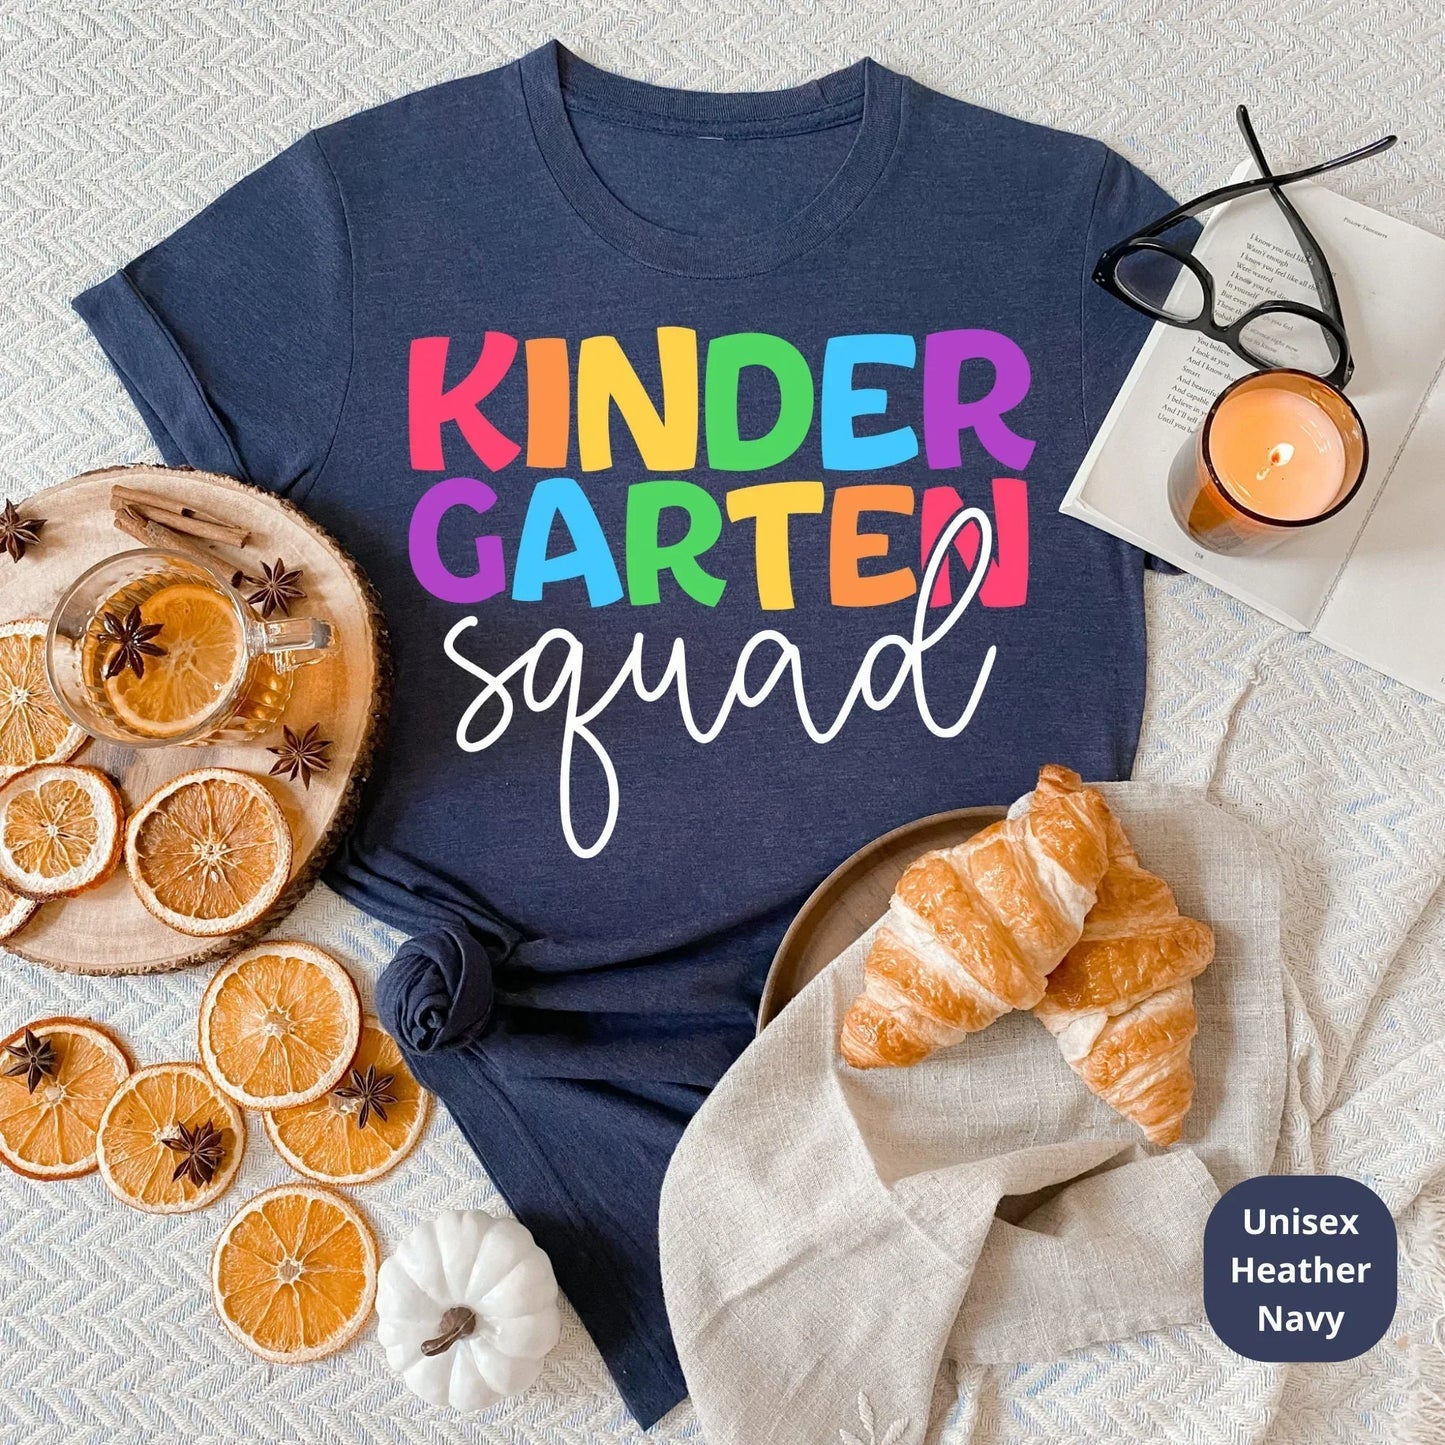 Kindergarten Squad Shirt | Great for Elementary Teams, Appreciation Gifts, Back to School, Holiday Celebration, Staff Christmas Presents HMDesignStudioUS